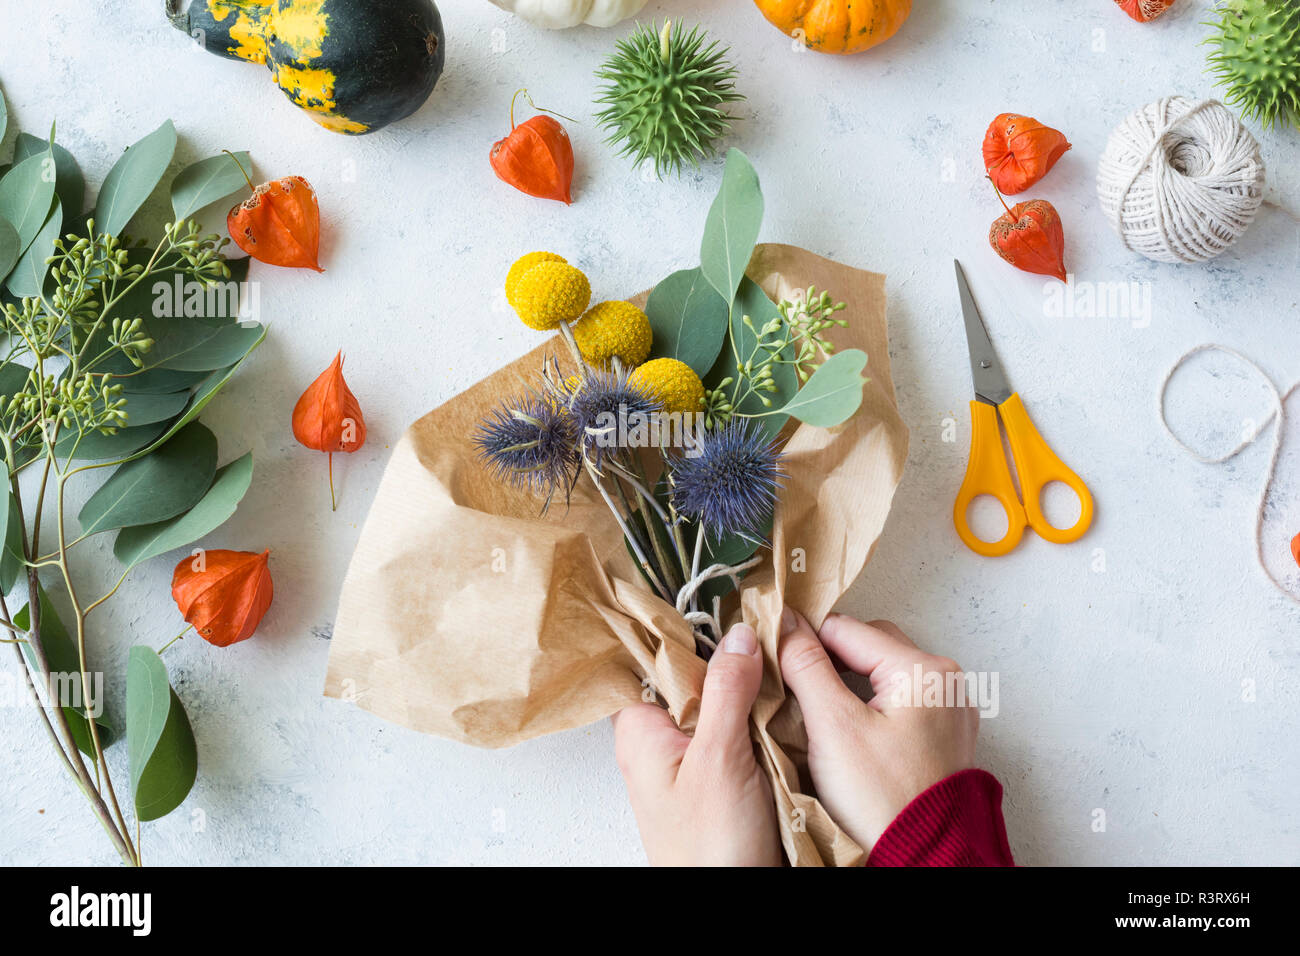 Autumnal decoration, ornamental pumpkins, hands wrapping bunch of flowers Stock Photo